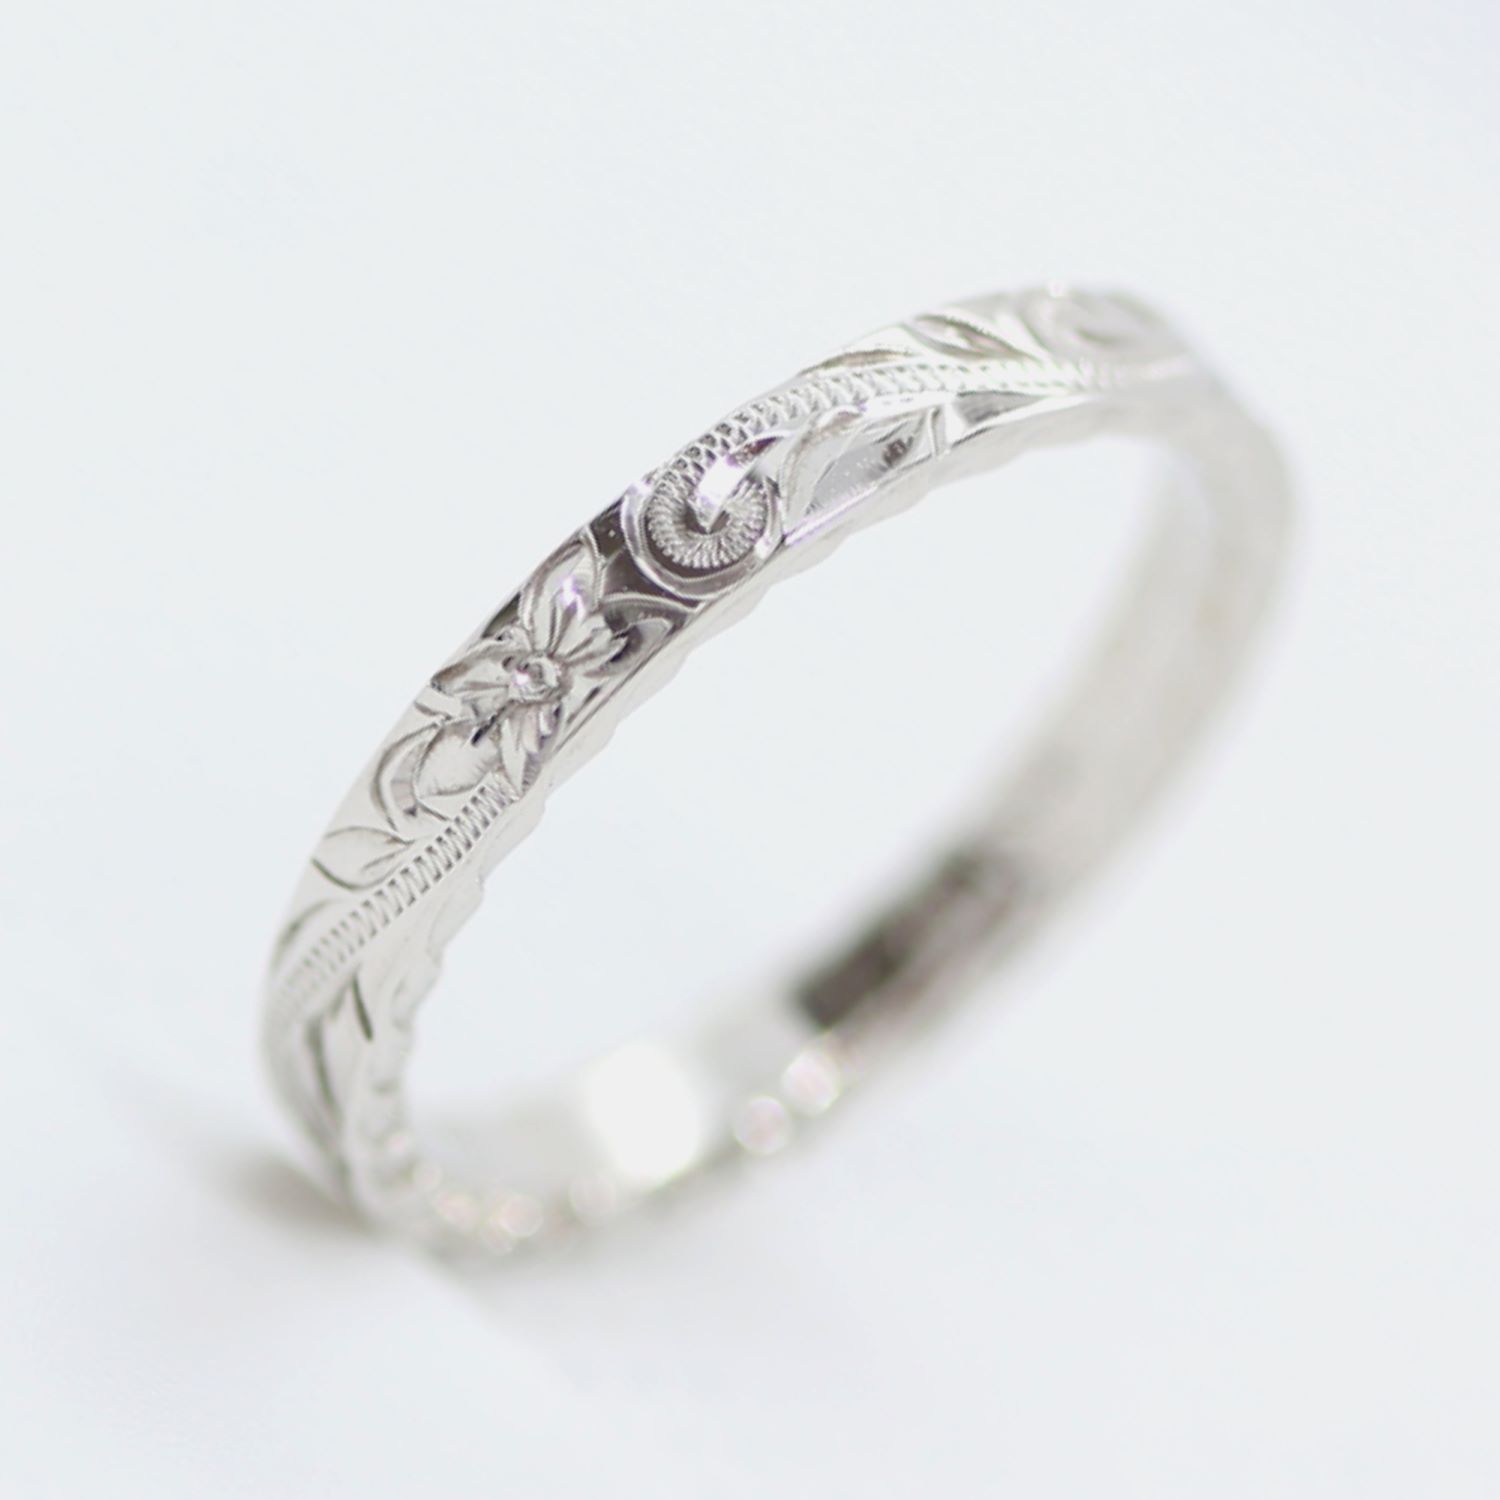 White Gold Wedding Rings-because some moments are to be cherished for a lifetime